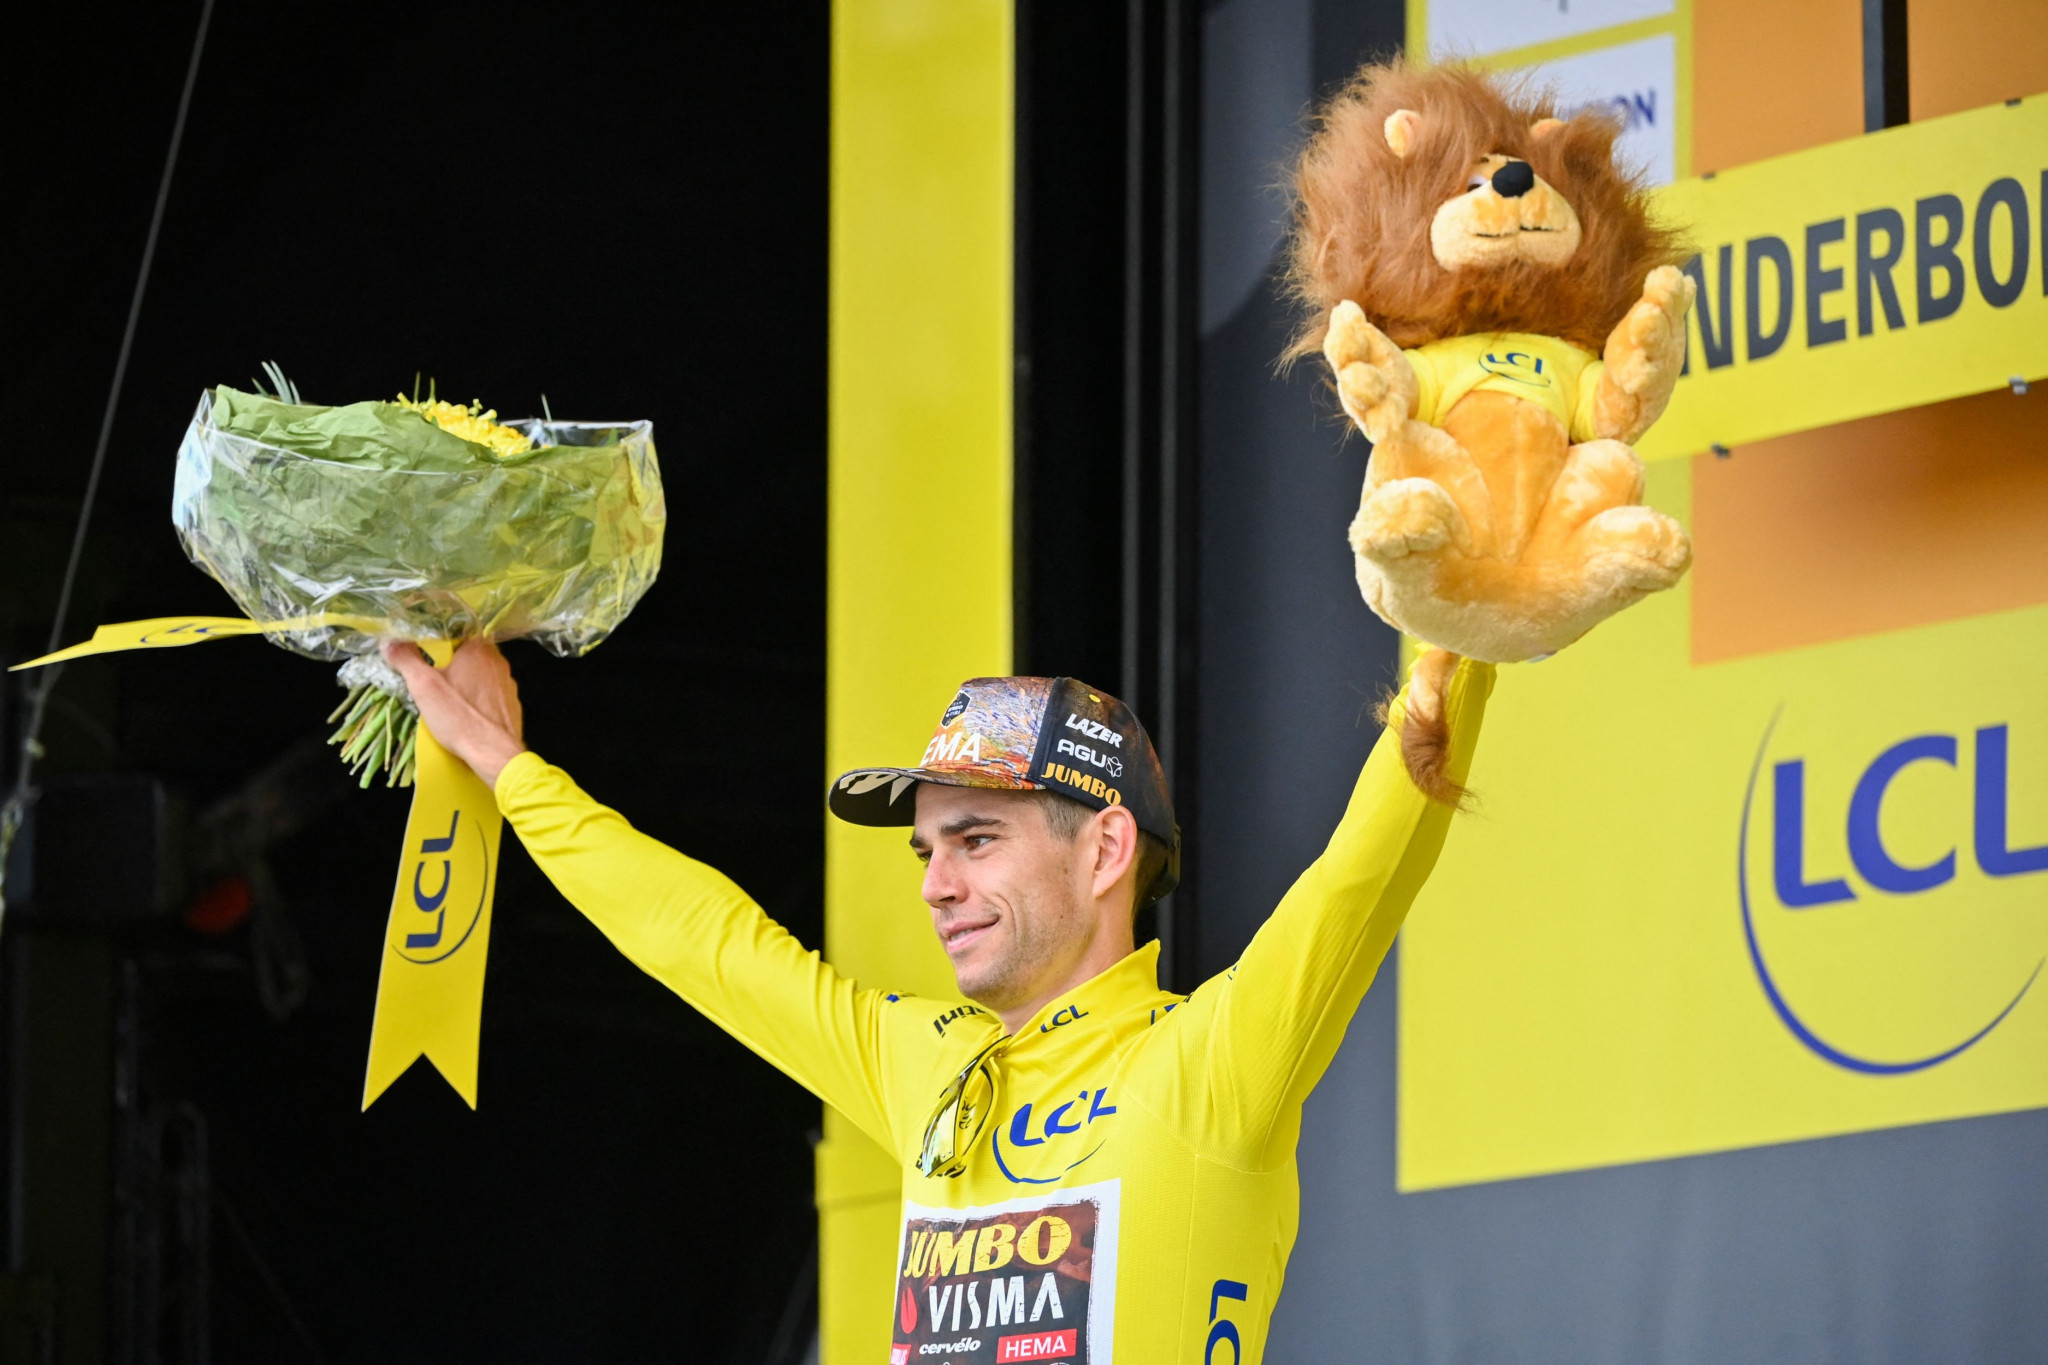 Belgium’s Wout van Aert retained the yellow jersey after finishing second for the third successive day ©Getty Images